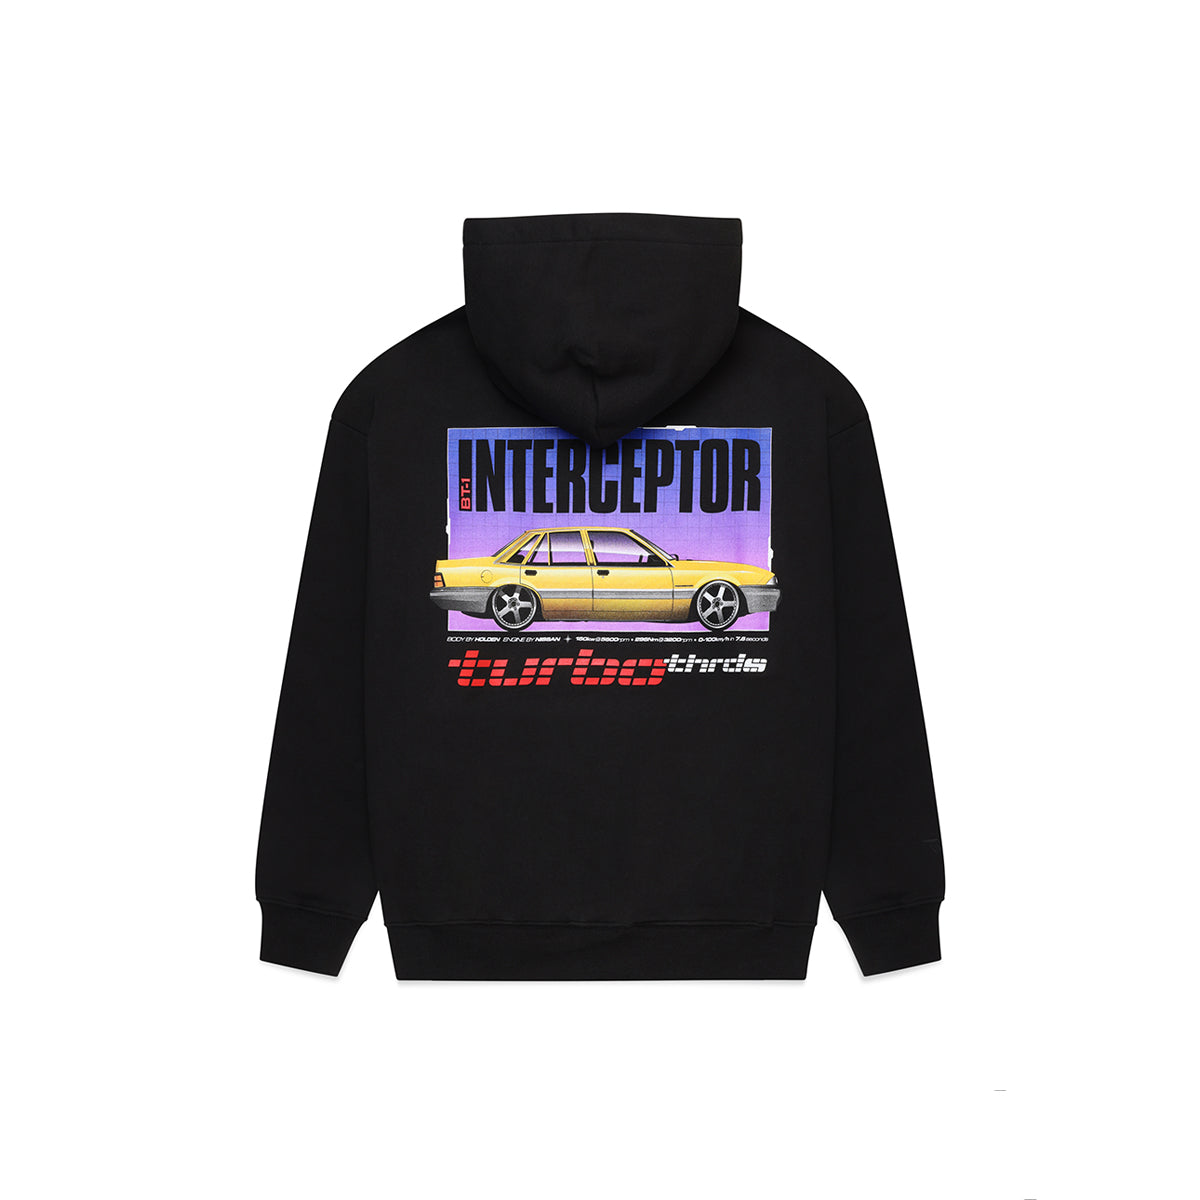 Turbo Threads Black Box Fit Hoodie with Interceptor text, red turbo threads logo and yellow Holden VL model